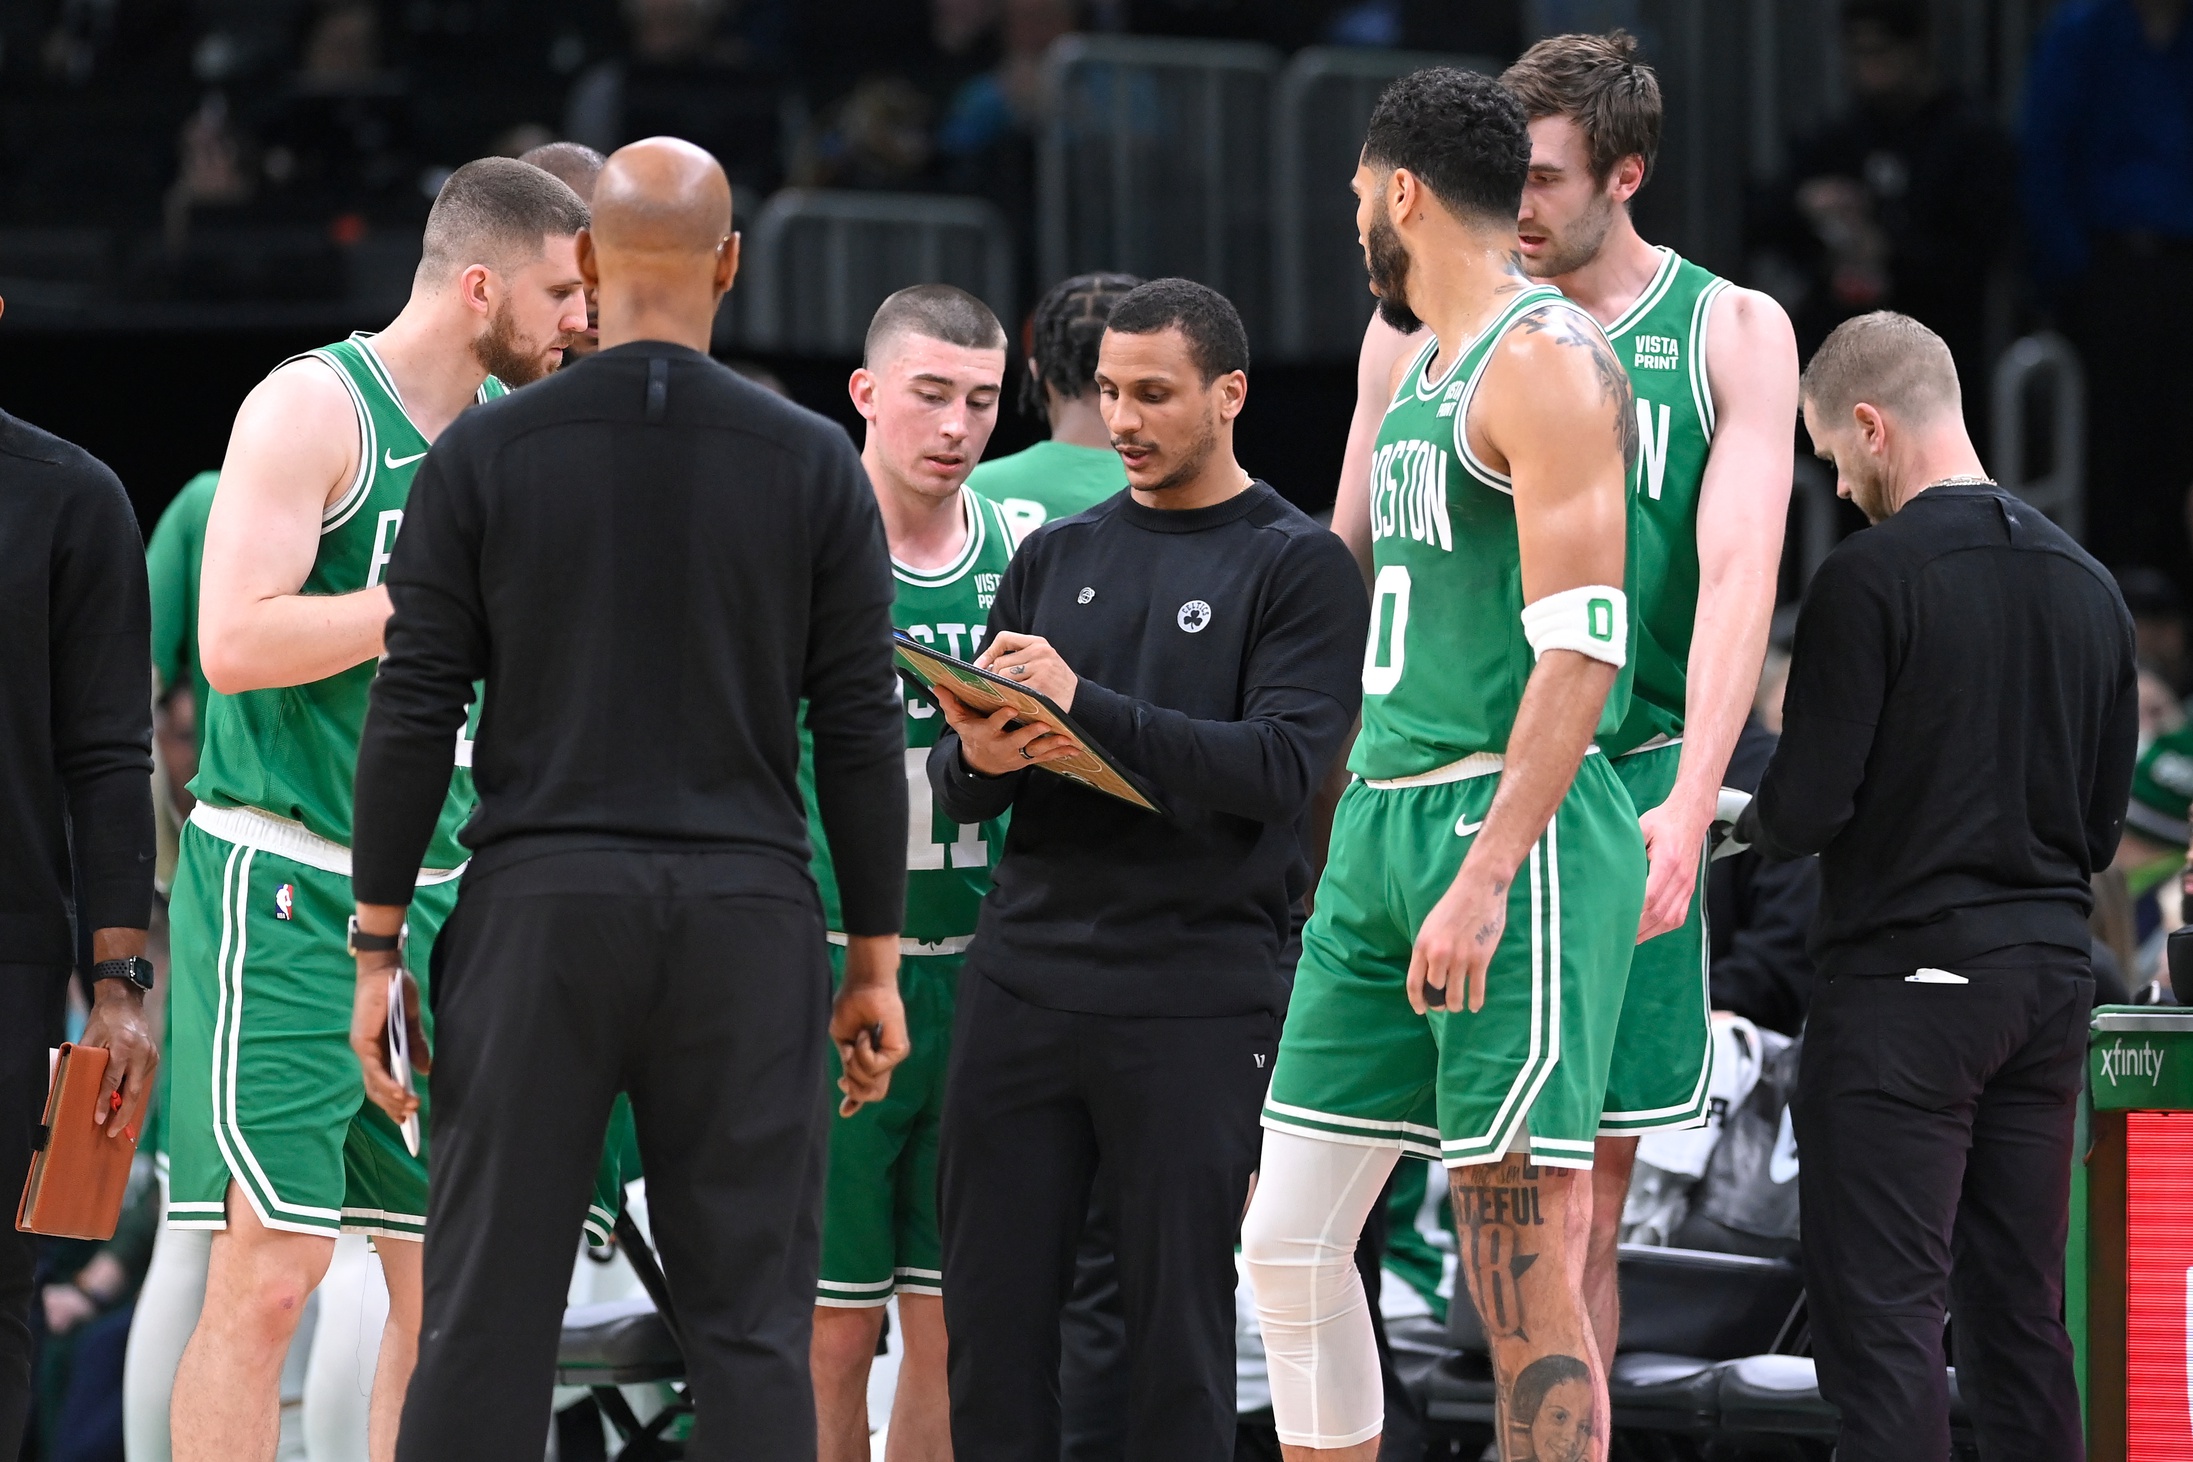 Joe Mazzulla will make changes to the Celtics rotation for the playoffs.